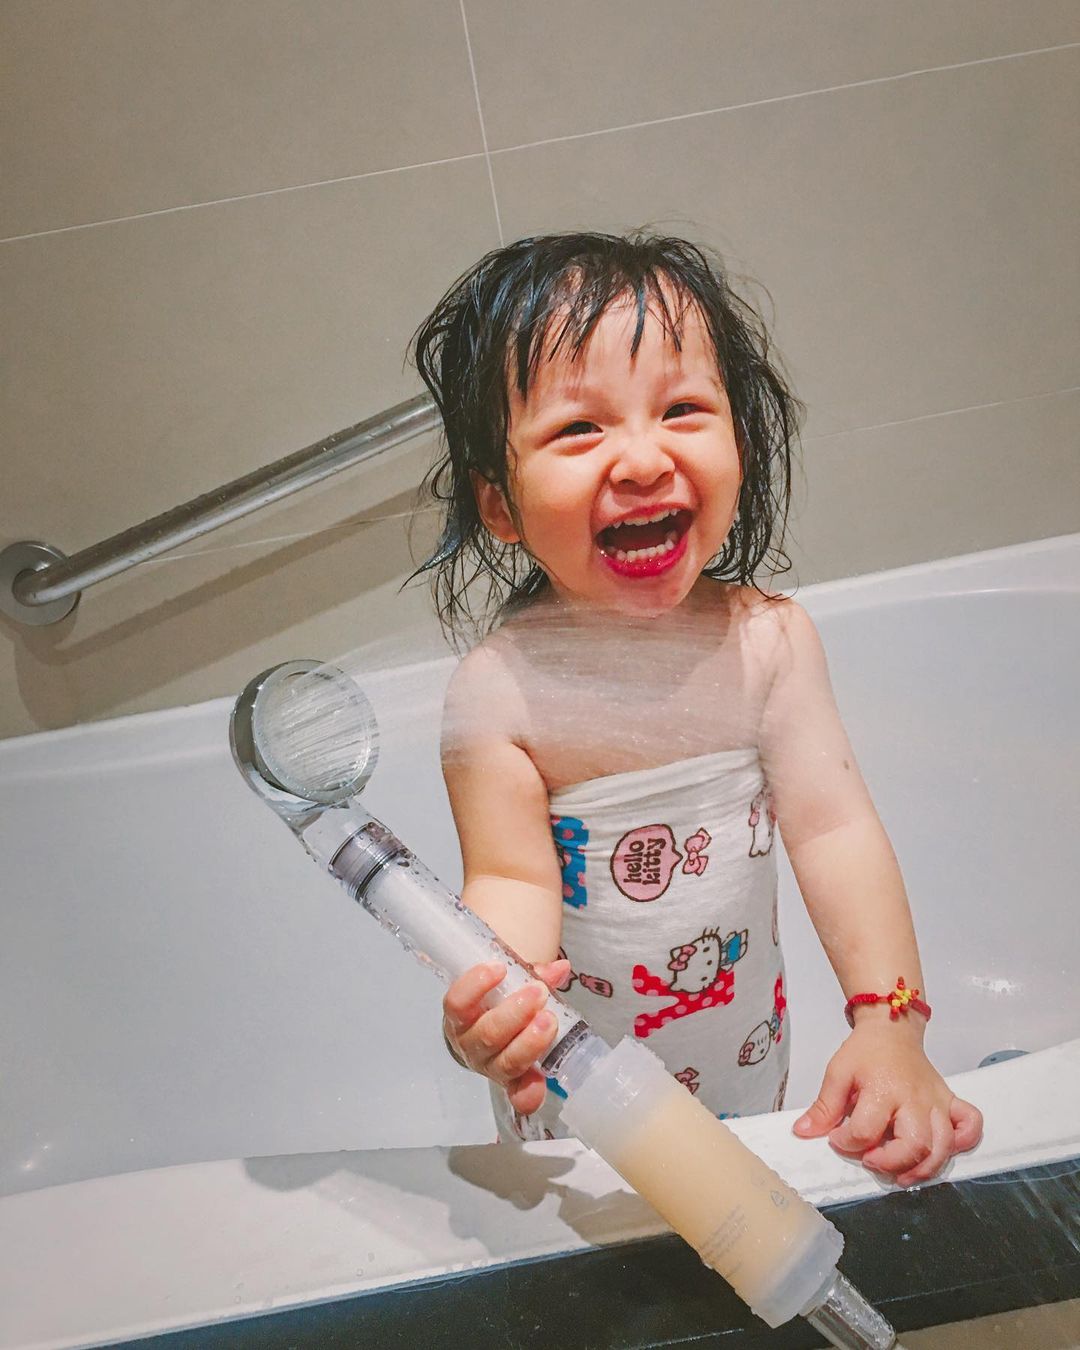 You're Probably Bathing Your Kids Too Often